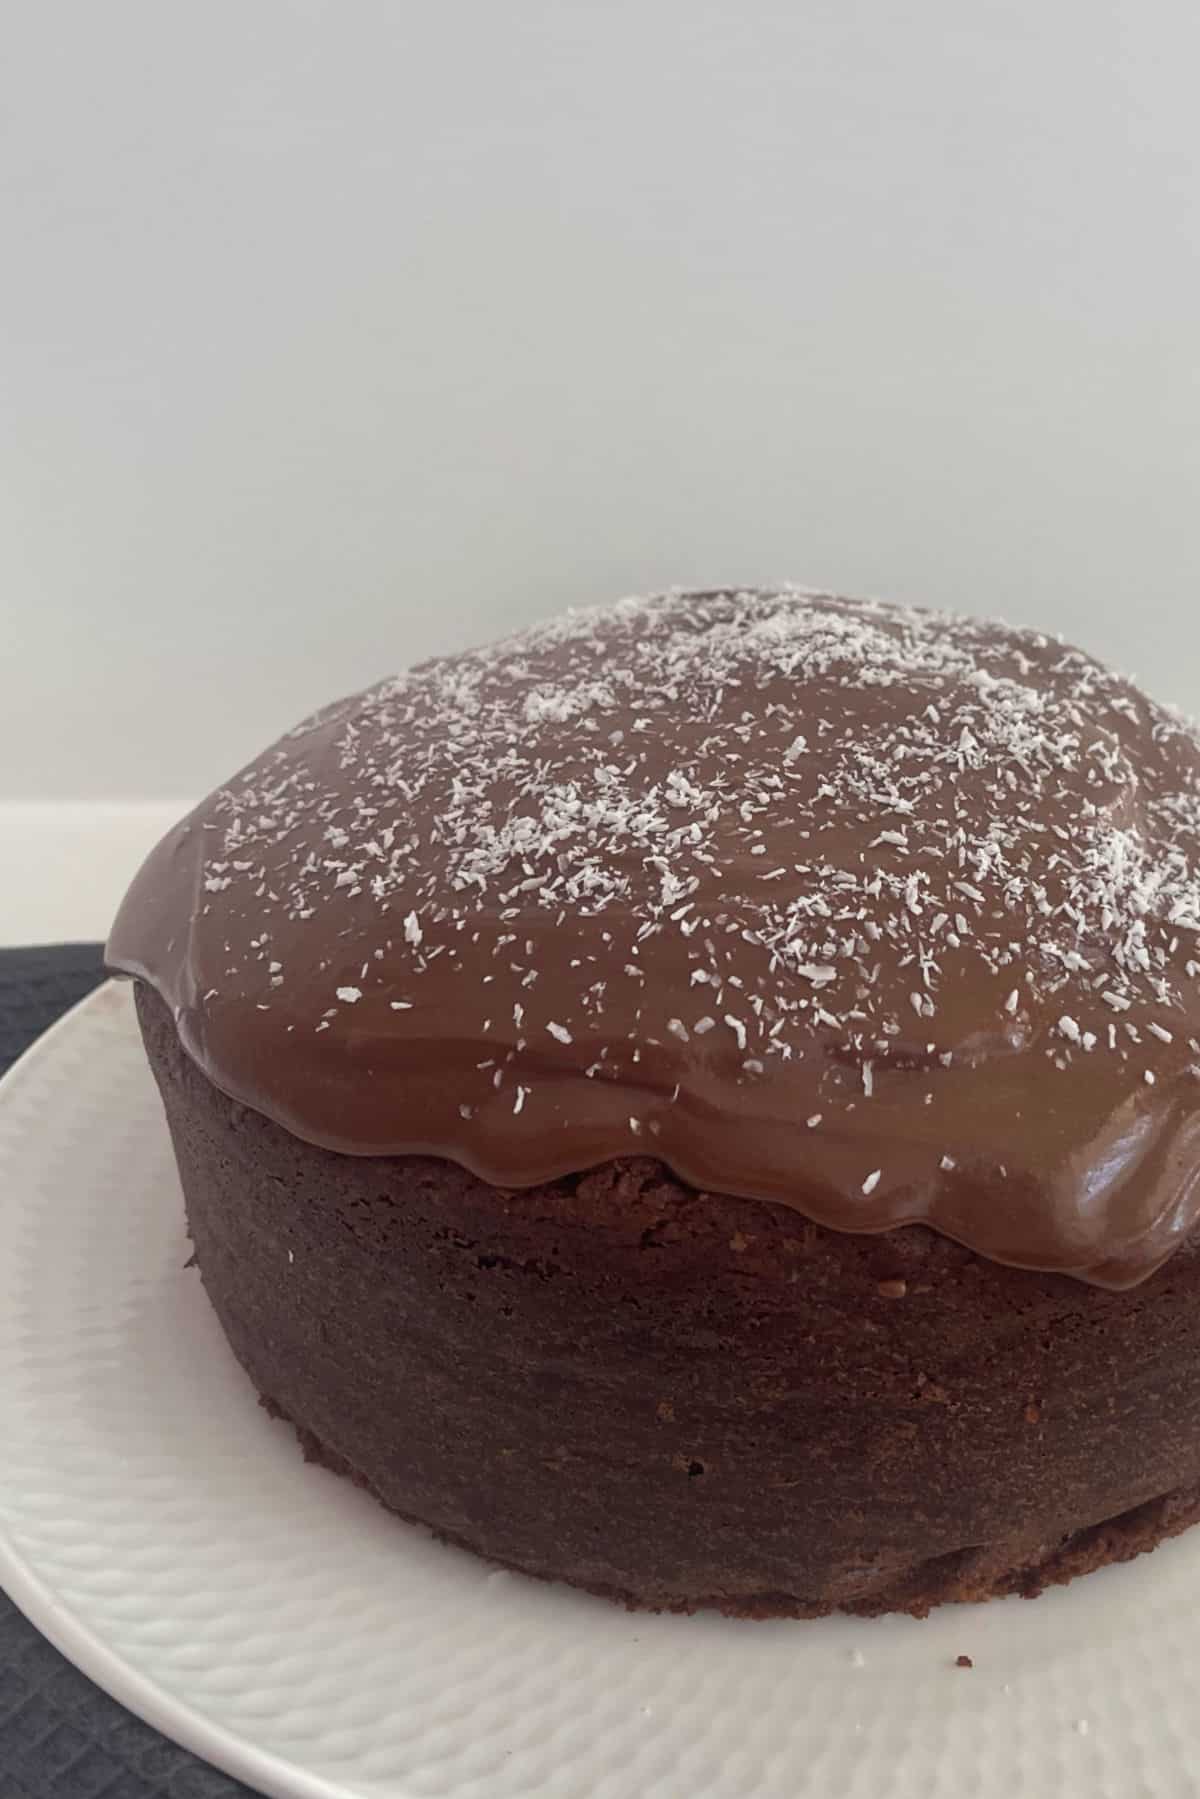 Side view of a chocolate and coconut cake on a white plate.